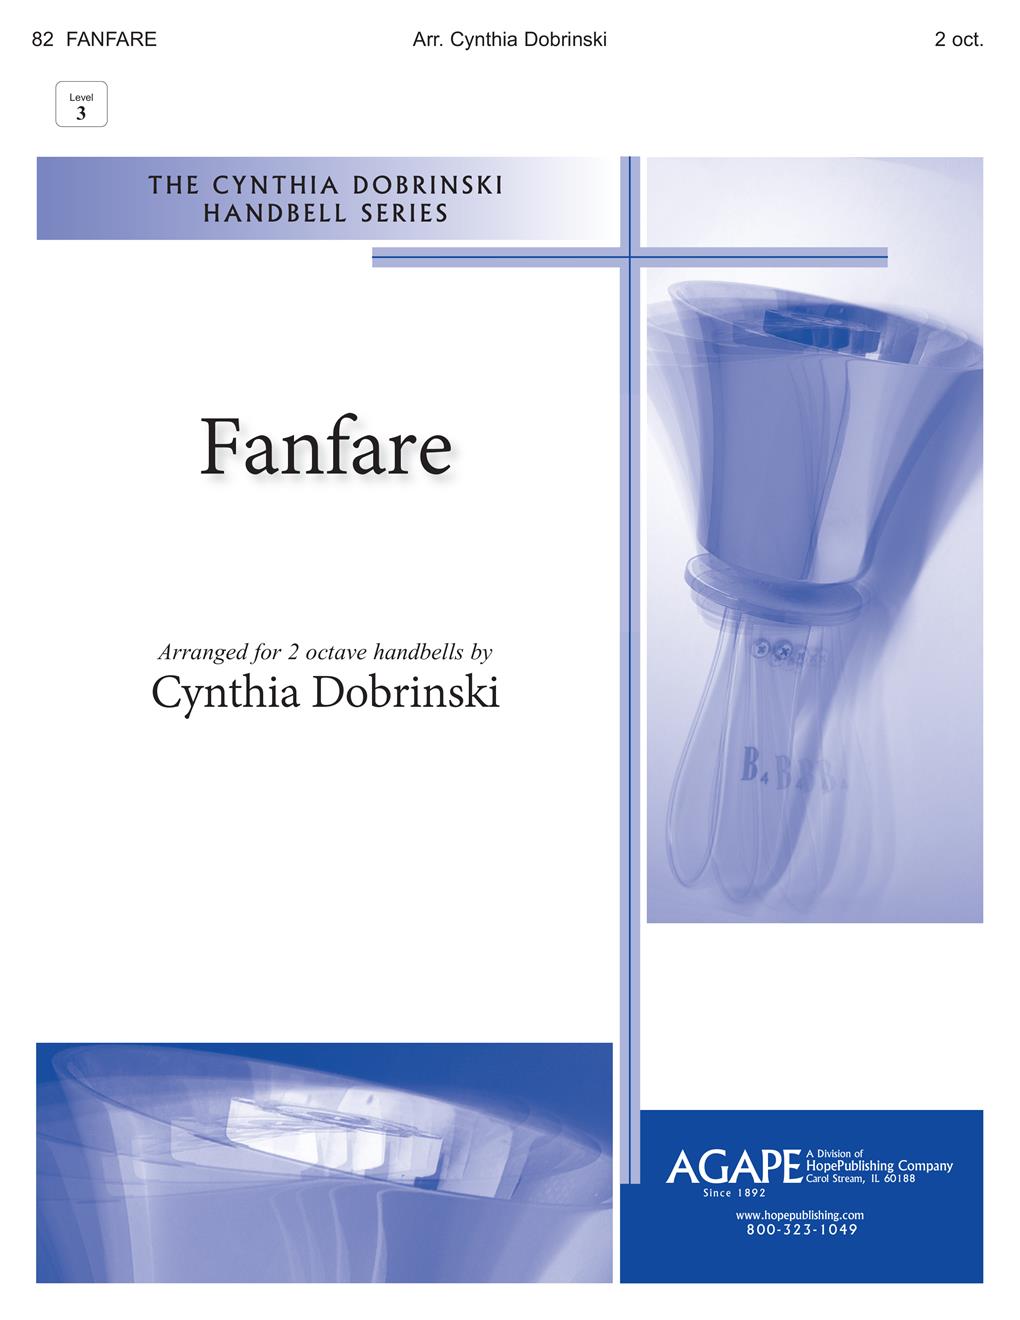 Fanfare - 2 Oct. Cover Image